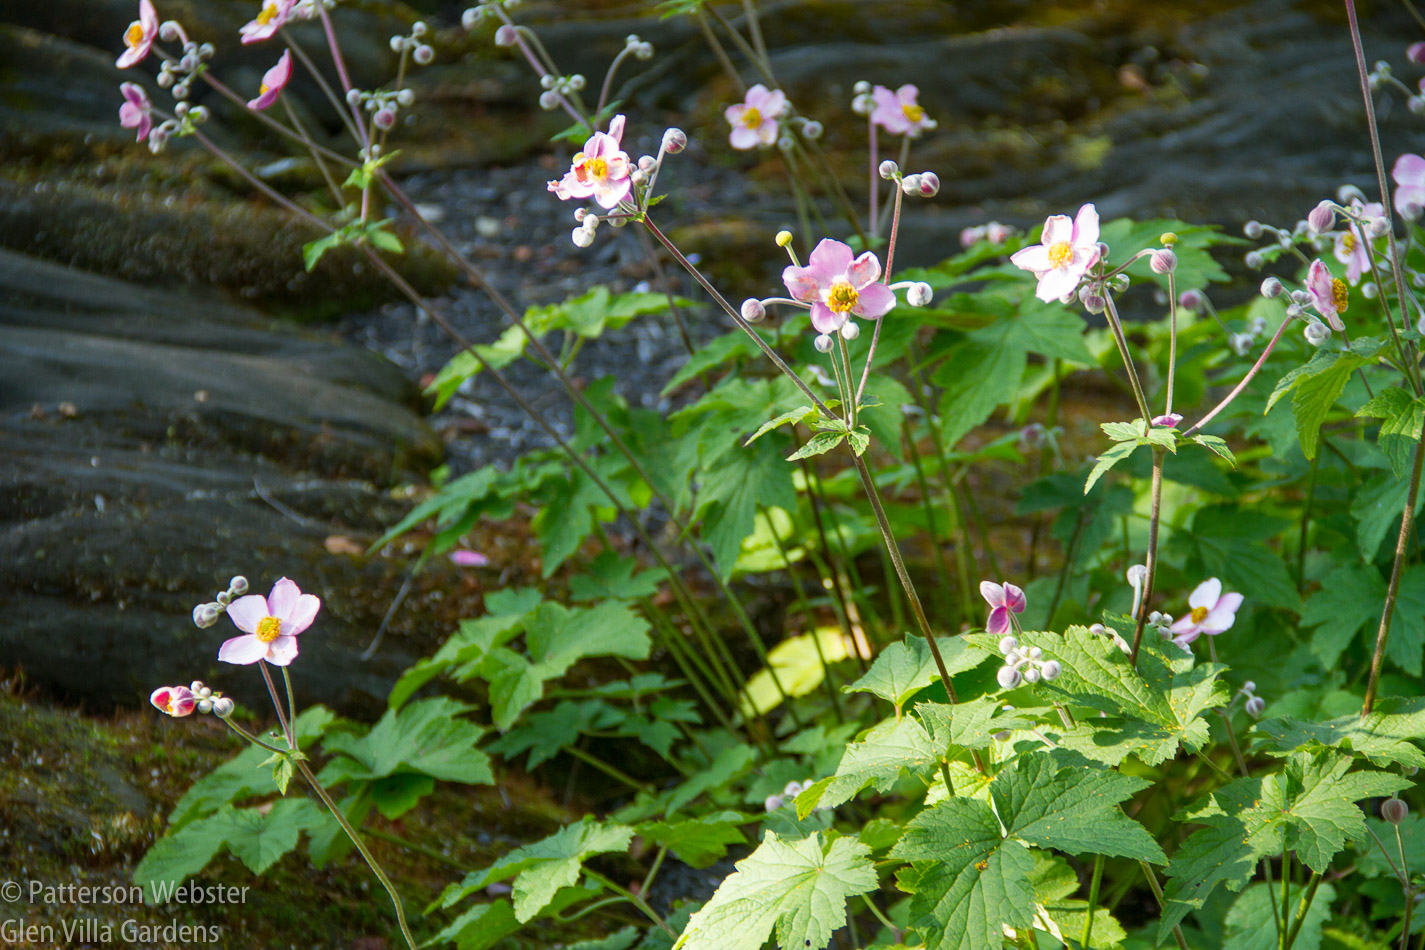 The light wasn't great when I took this photo -- but believe me, the anemones were a soft pink cloud rising above the hard grey stone.